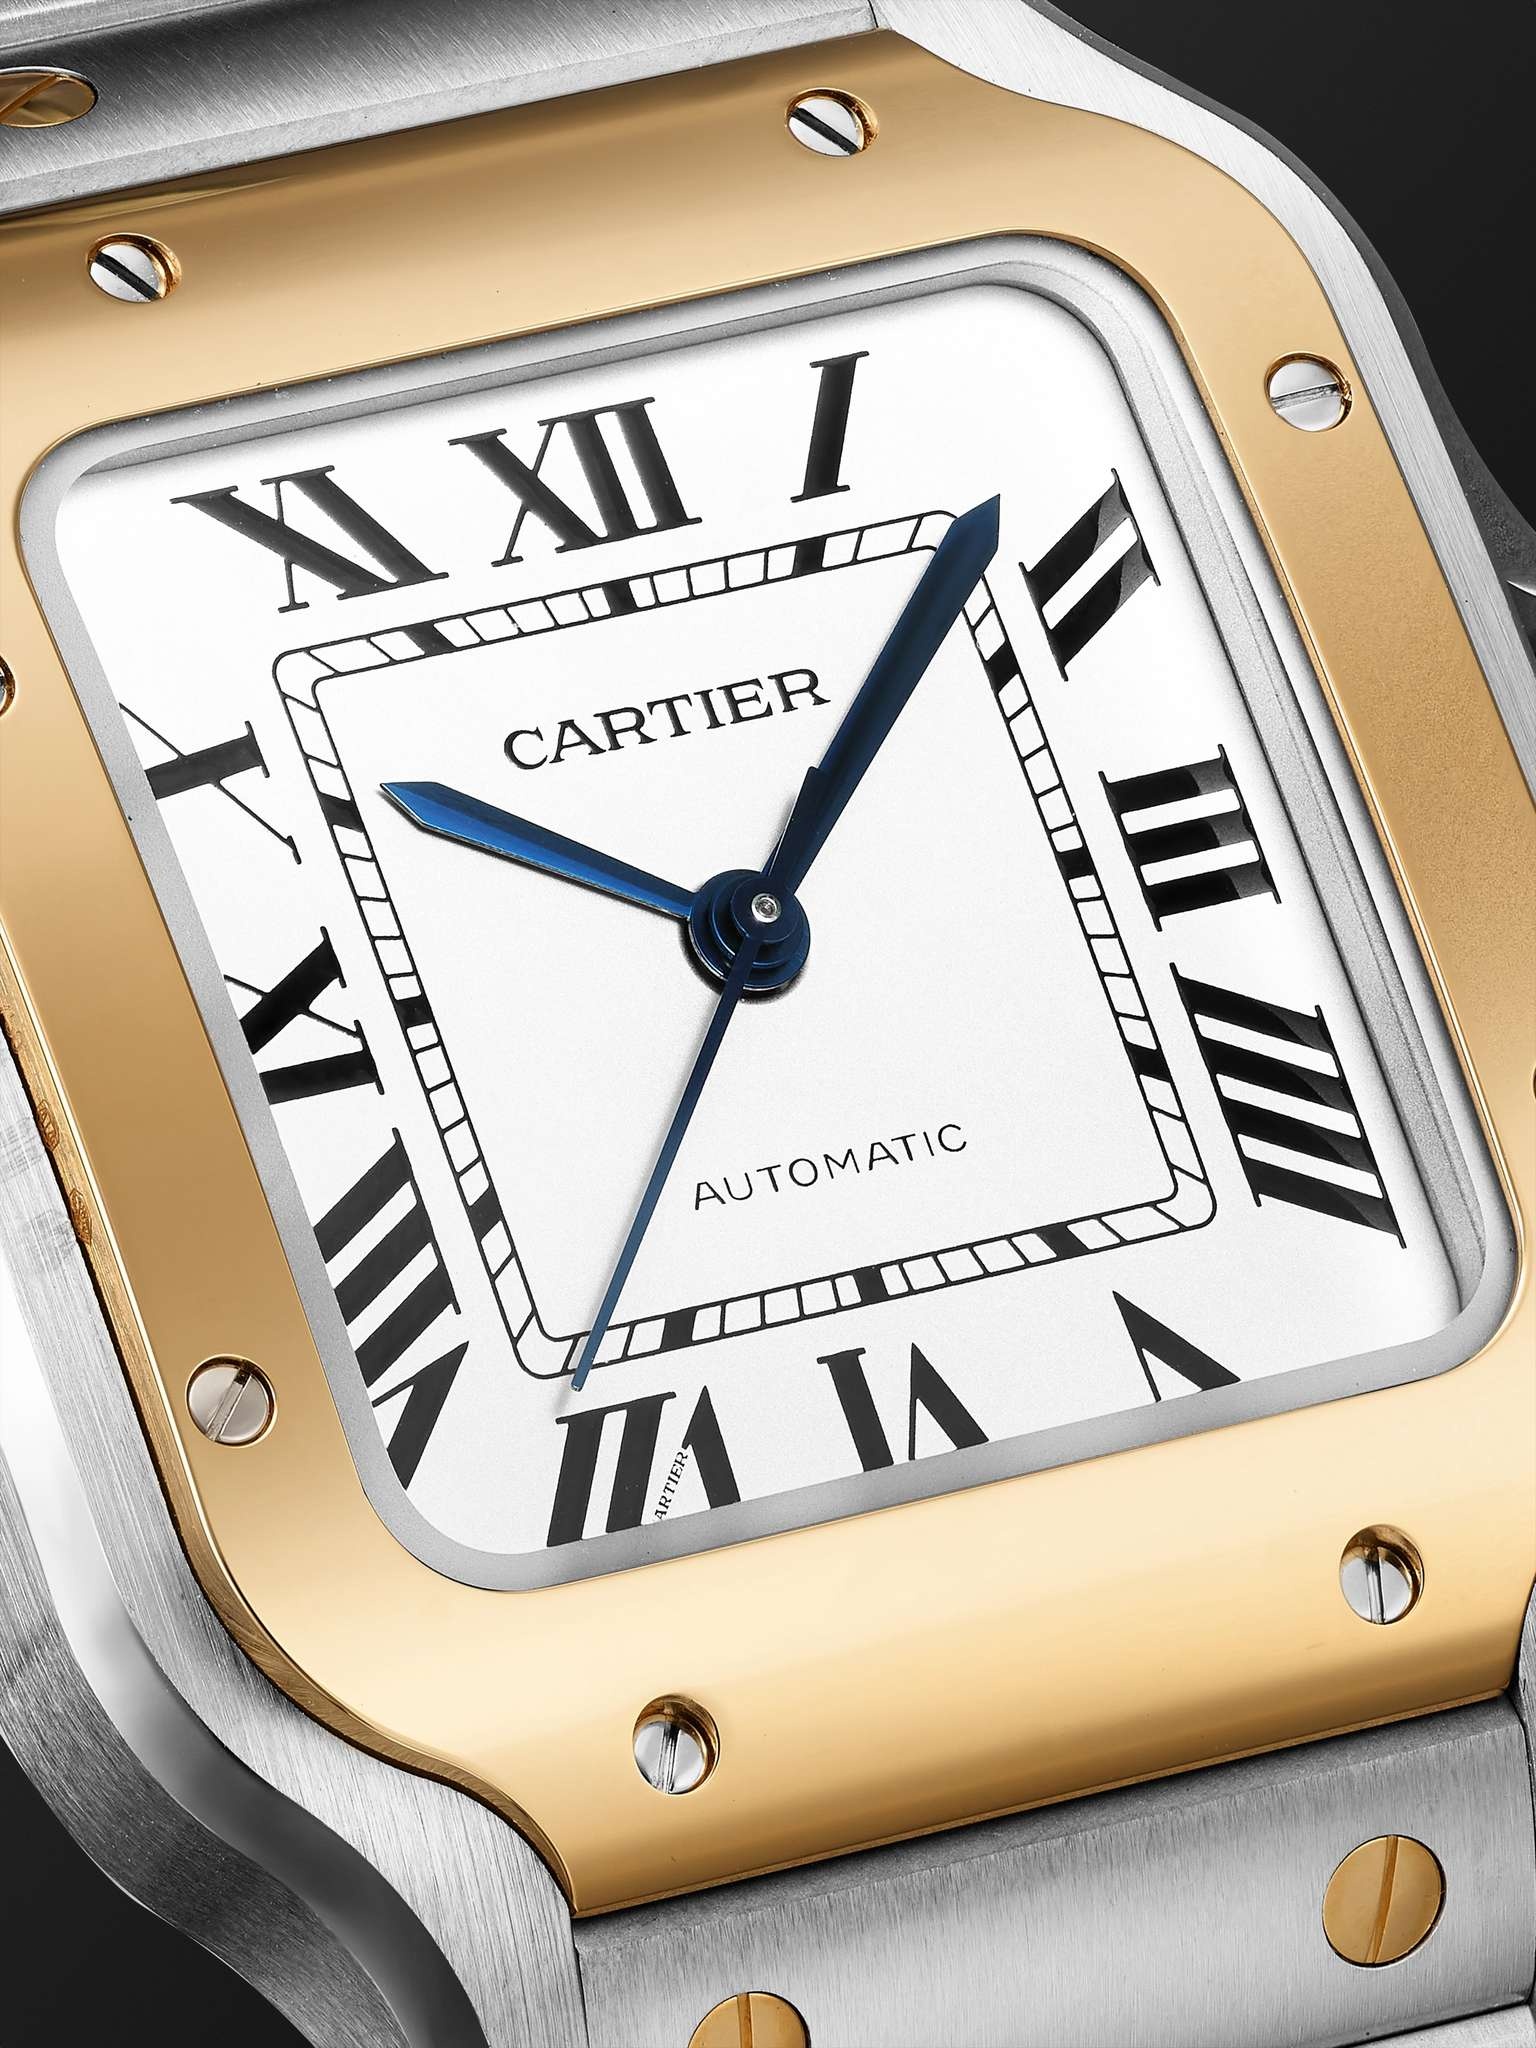 Santos de Cartier Automatic 35.1mm Interchangeable 18-Karat Gold, Stainless Steel and Leather Watch, - 5